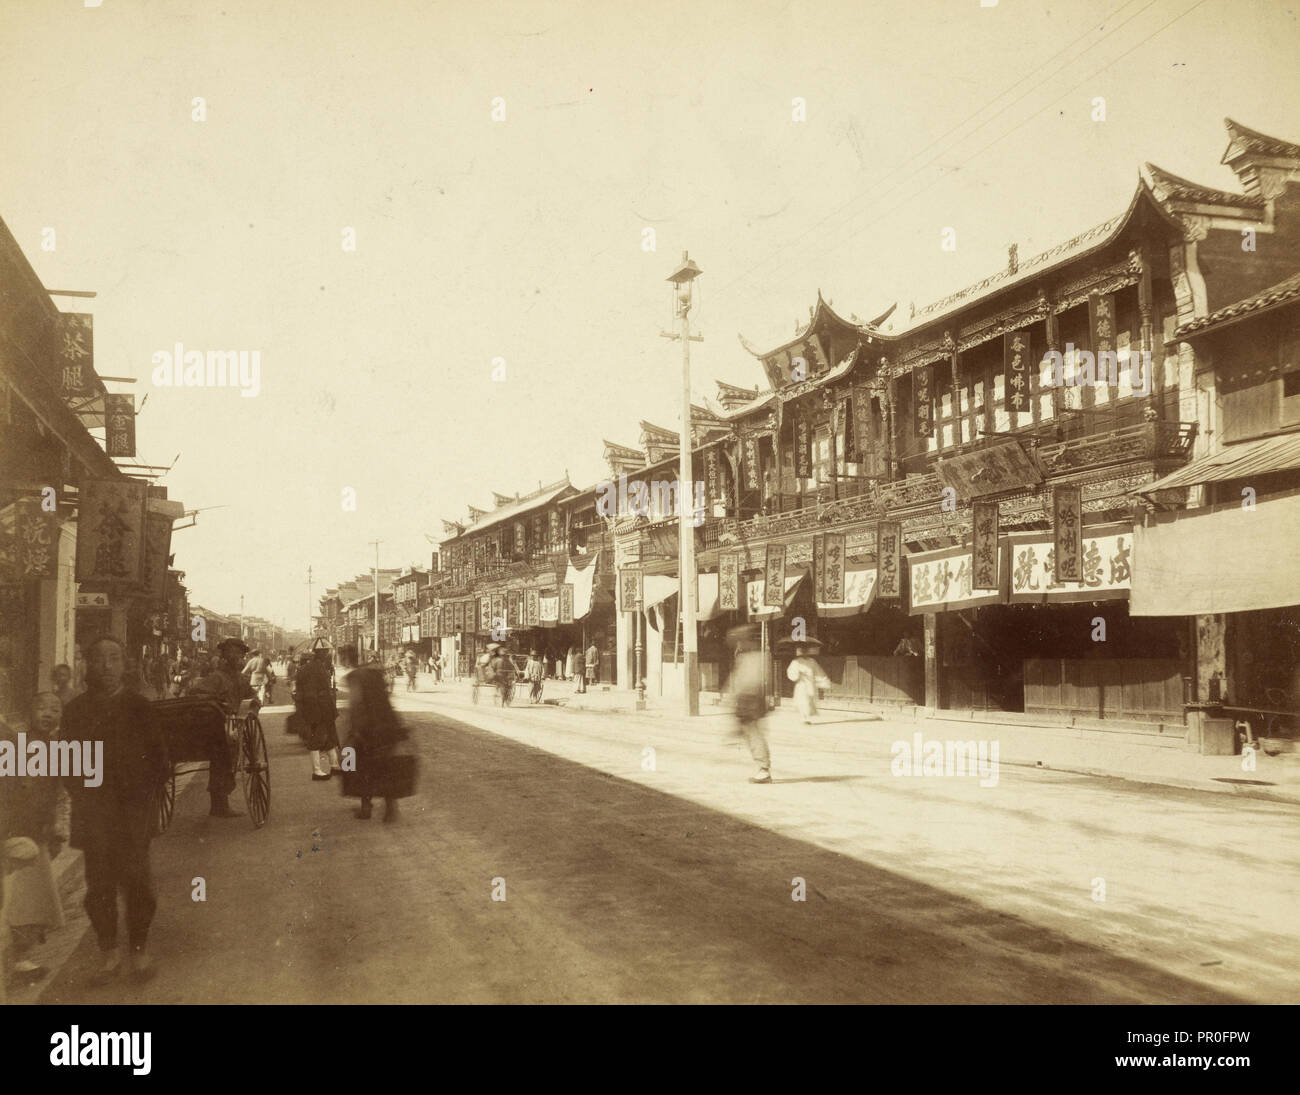 Shanghai, Nanking Road,collection of photographs of China and Southeast Asia, Worswick, Clark, Albumen Stock Photo